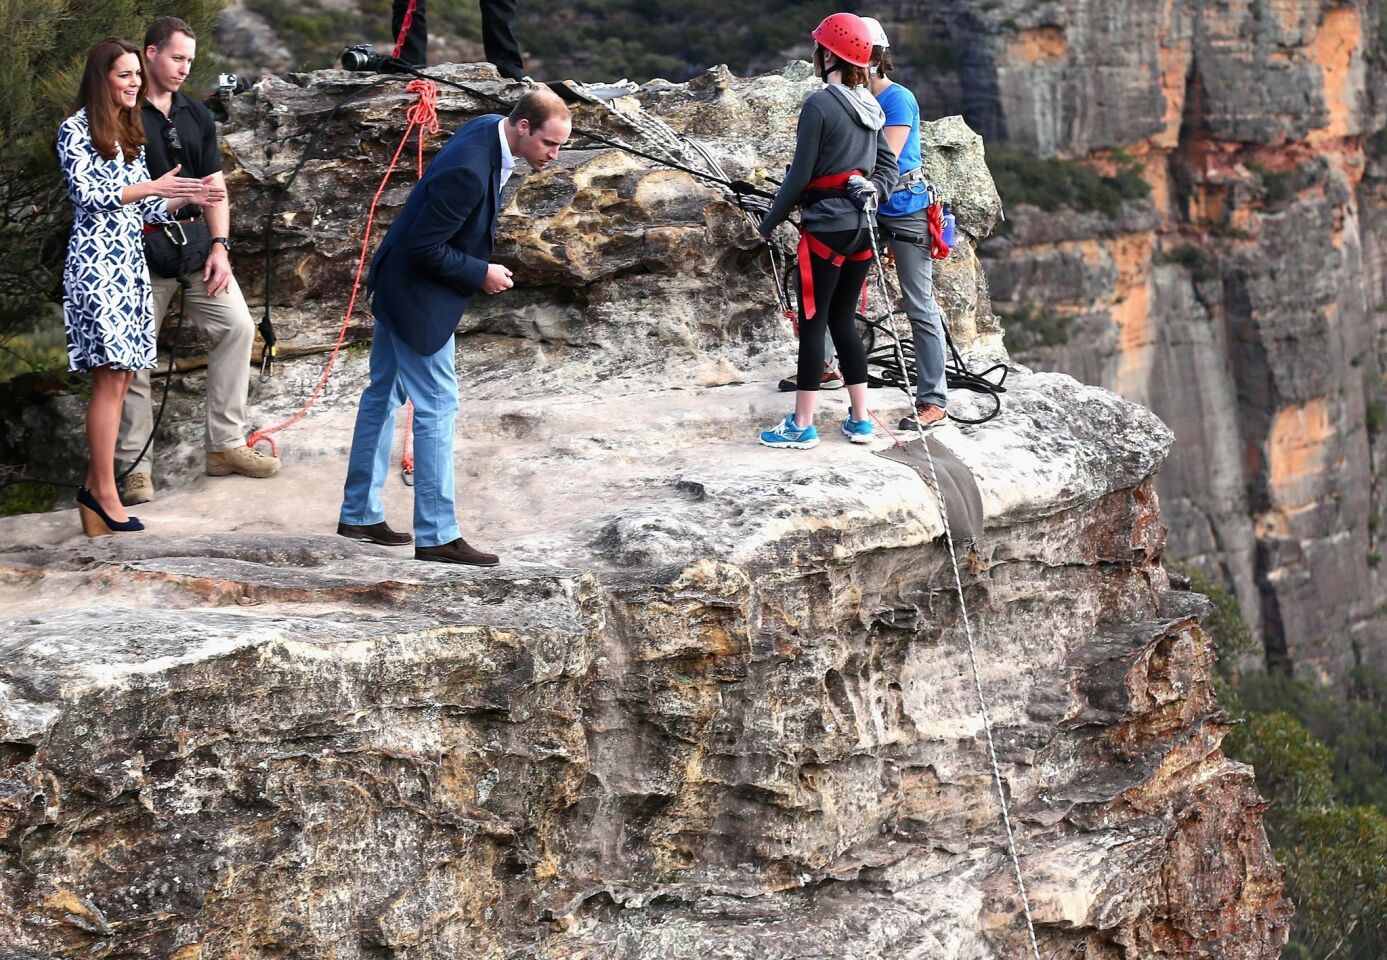 William looks over the cliff edge as he and his wife observe rappelling and team-building exercises at Narrow Neck Lookout near Katoomba, Australia.